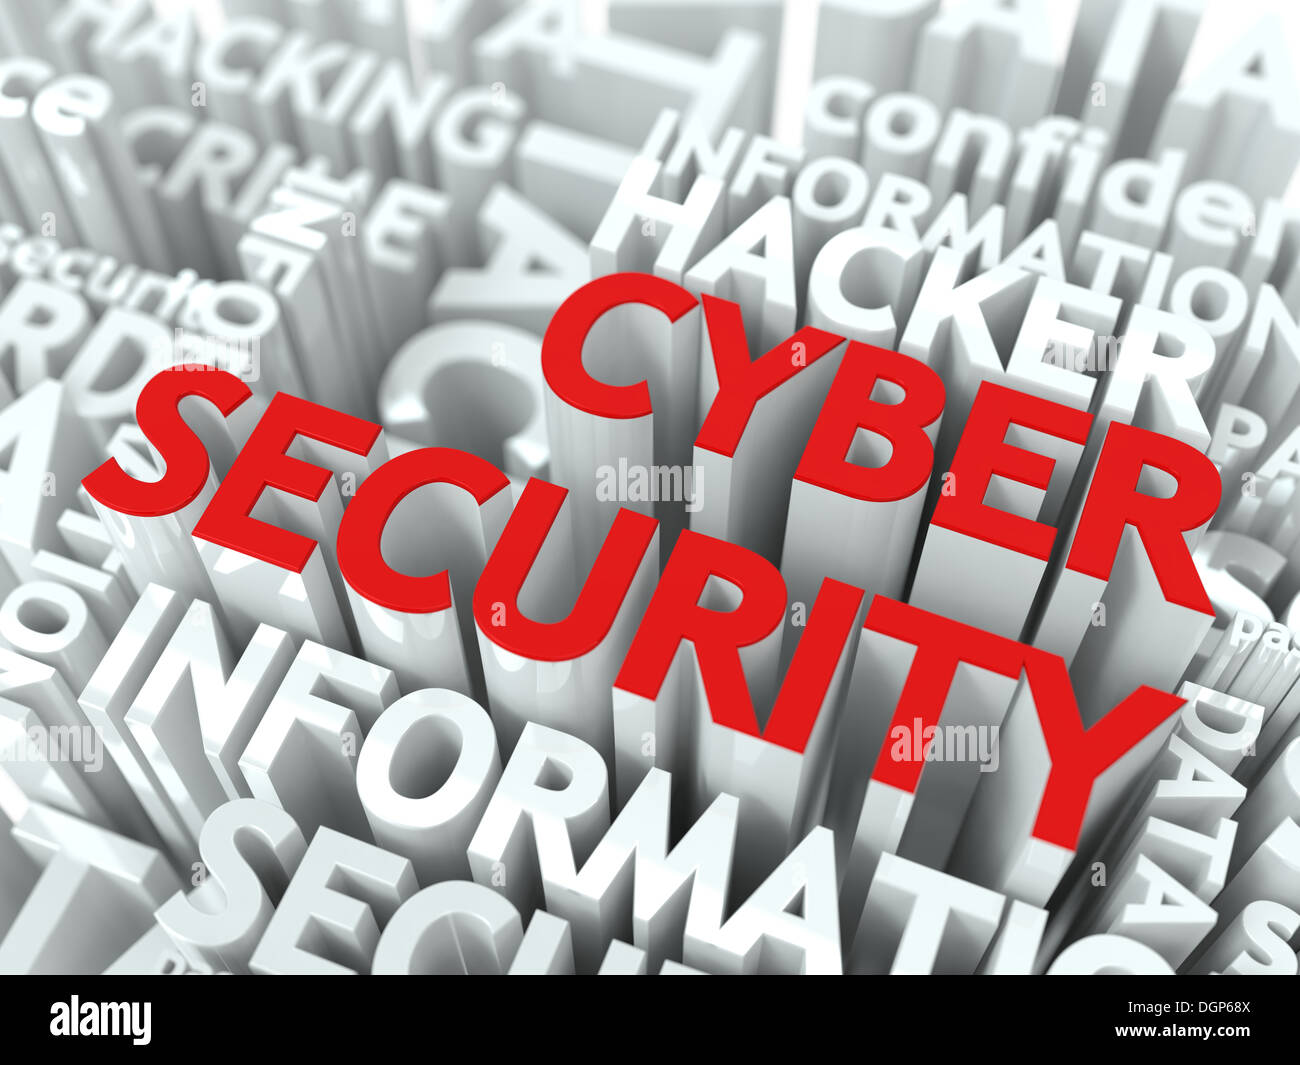 Cyber Security Concept. Stock Photo